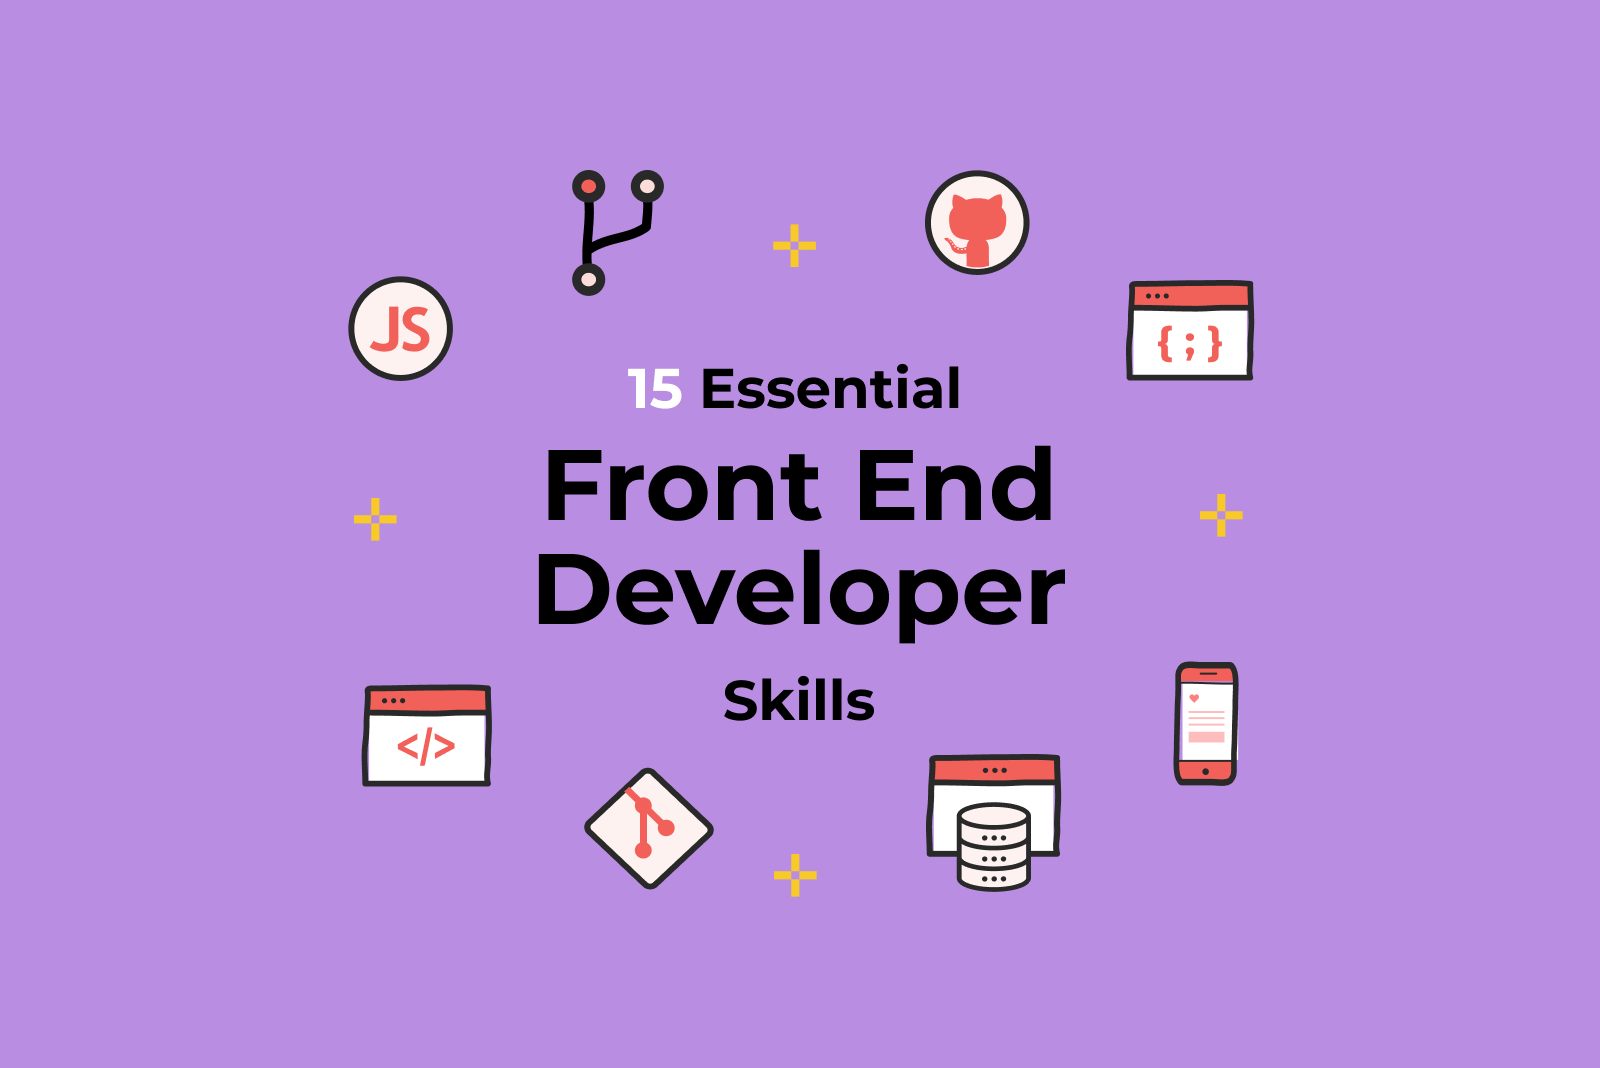 Black text on purple background reads "15 Essential Front End Developer Skills," and is surrounded by small multi-colored icons representing different technical skills including HTML, CSS, Git, Mobile Design, and JavaScript